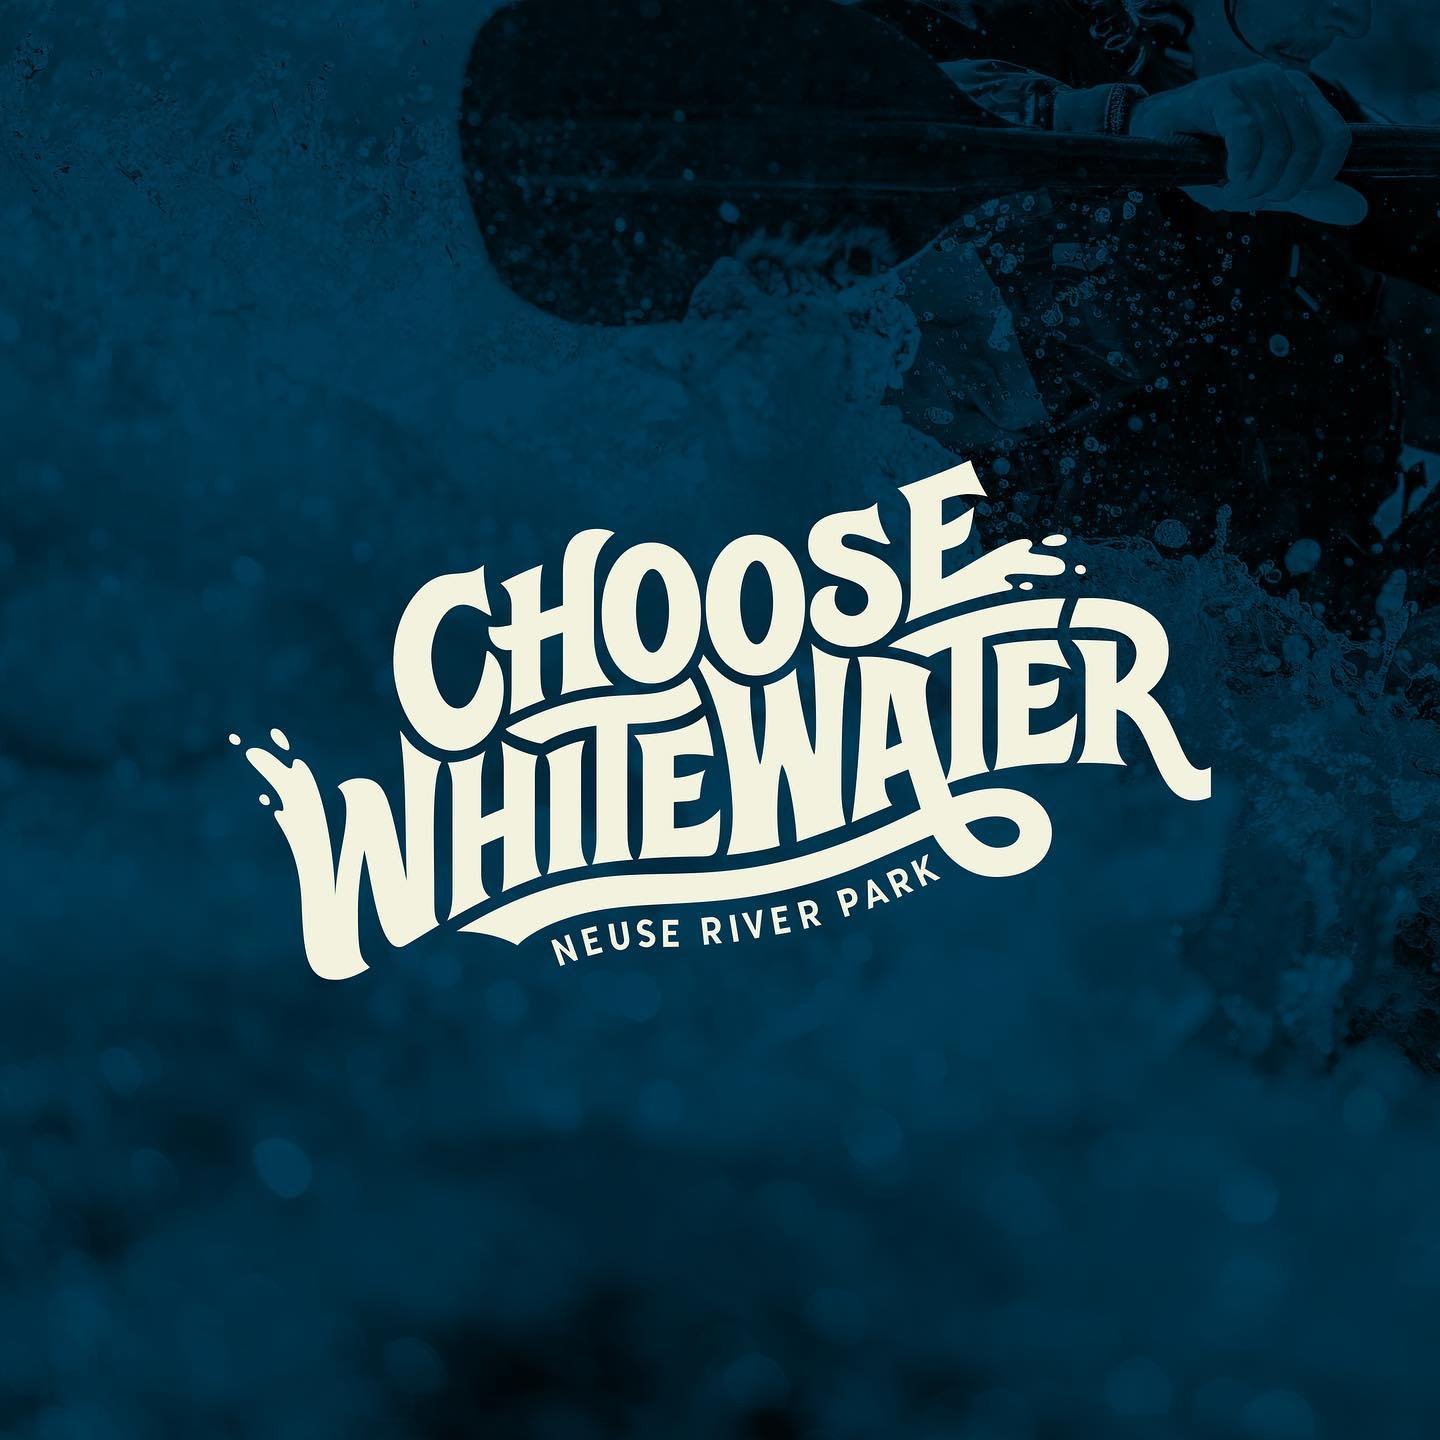 Introducing #ChooseWhitewater 🛶

Choose Whitewater is the tagline for the Neuse River Park plan that looks to transform an 80 acre area of undeveloped city owned land downstream of Falls Dam. If approved it will be a free outdoor playground of both 